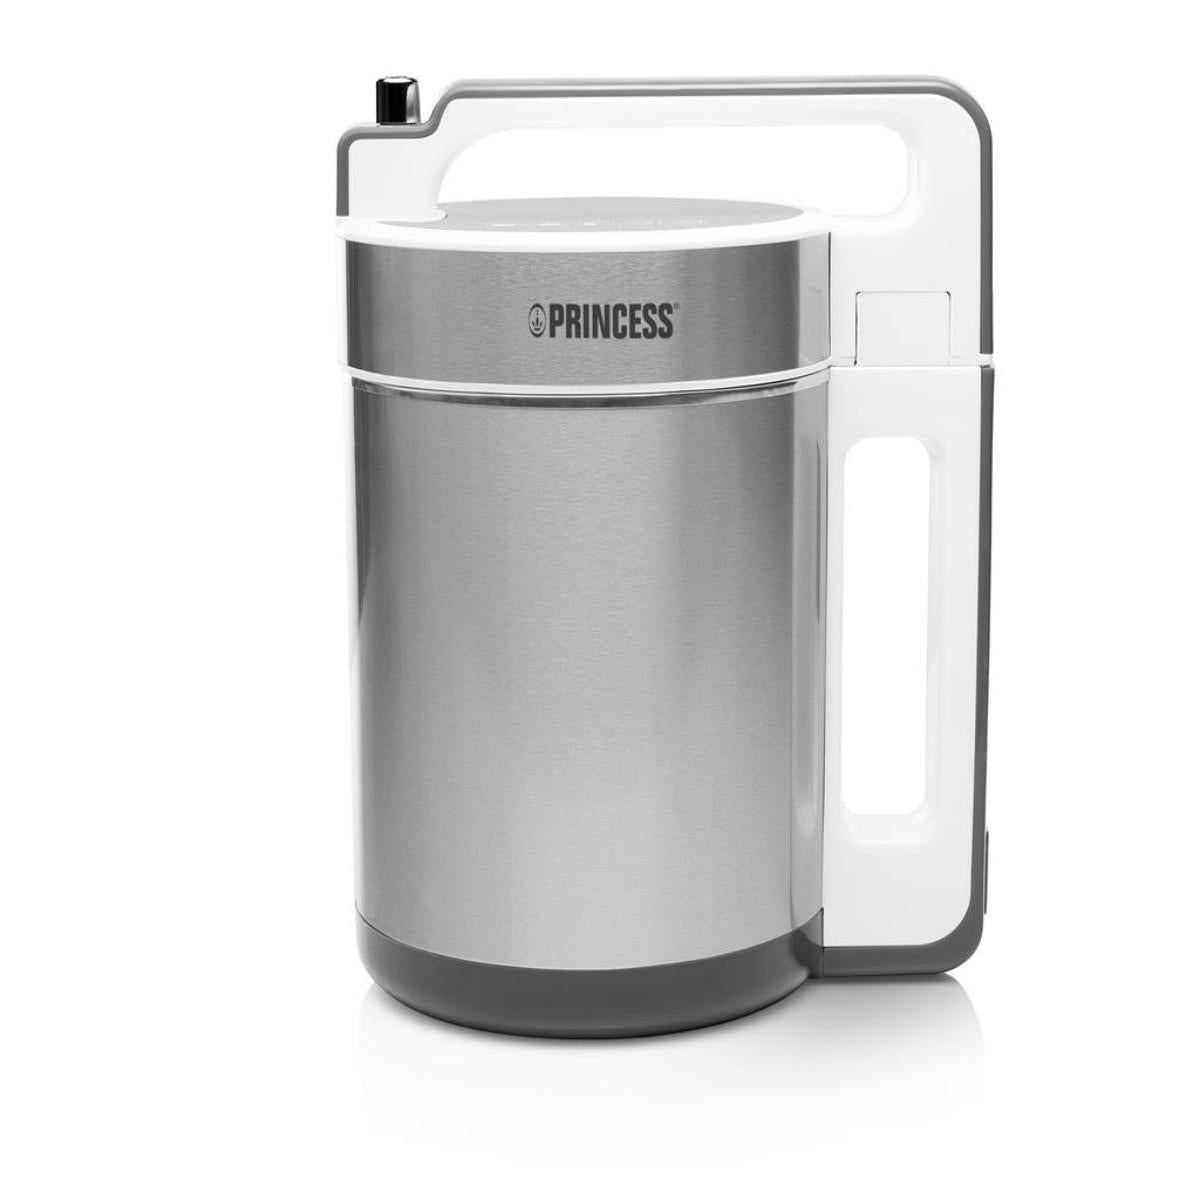 01.212042.01.001/Princess  soup blender make a fresh soup within 23 minutes by pressing one button l 1000 / 1.5L / 5